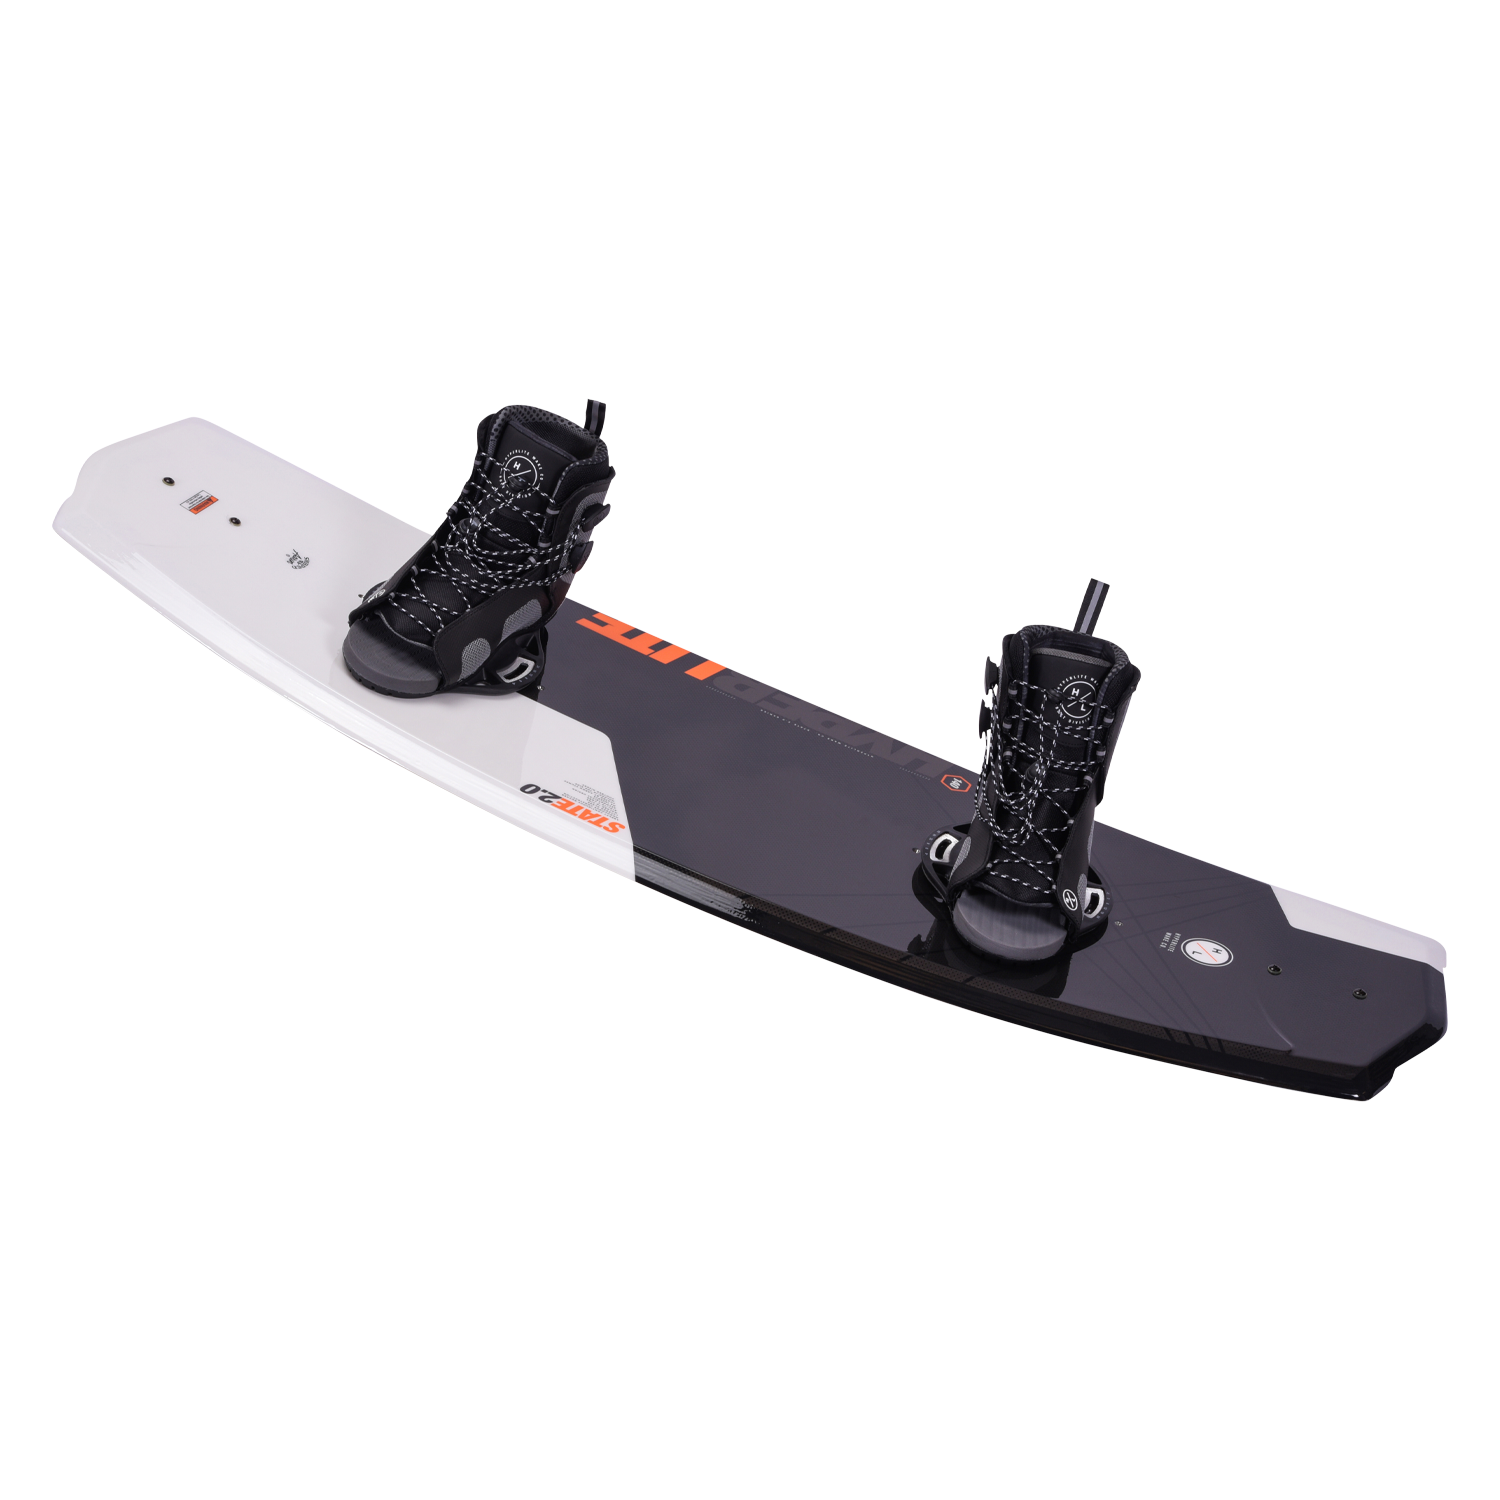 Hyperlite State 2.0 with Remix Binding - 88 Gear